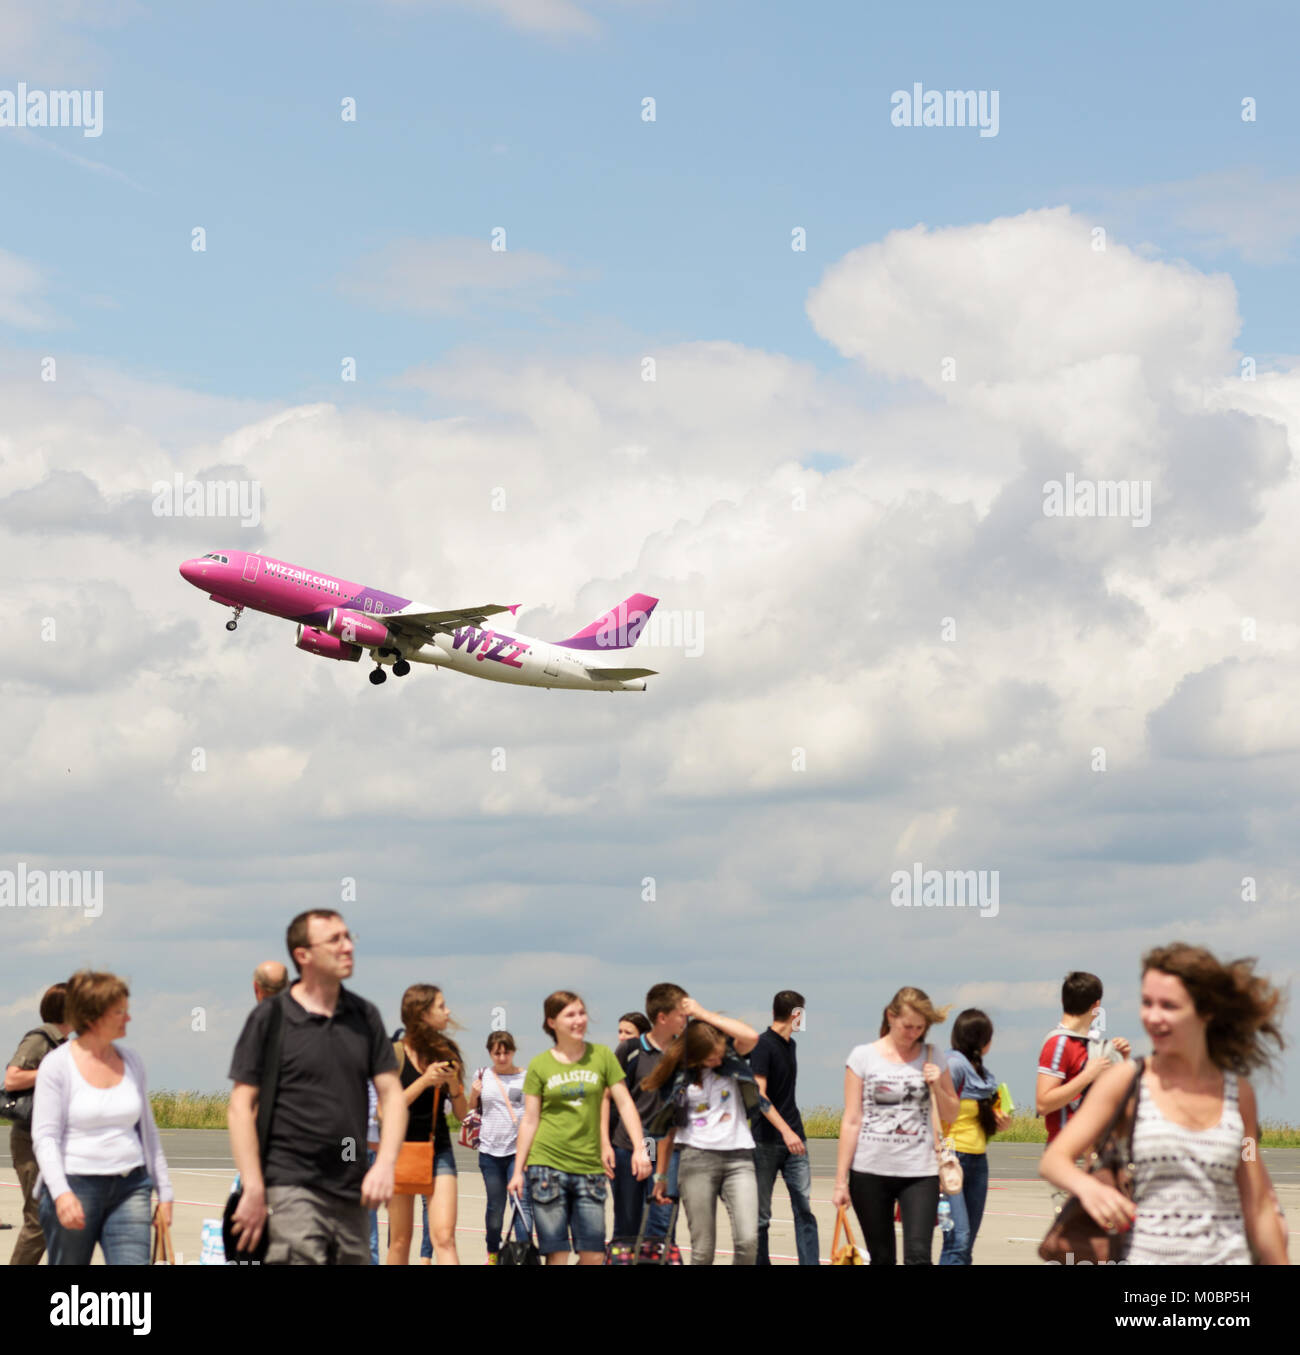 Dortmund, Germany - June 22, 2013: Passengers on a runway in the airport of Dortmund, Germany on June 22, 2013 under Wizzair plane taking off. Created Stock Photo